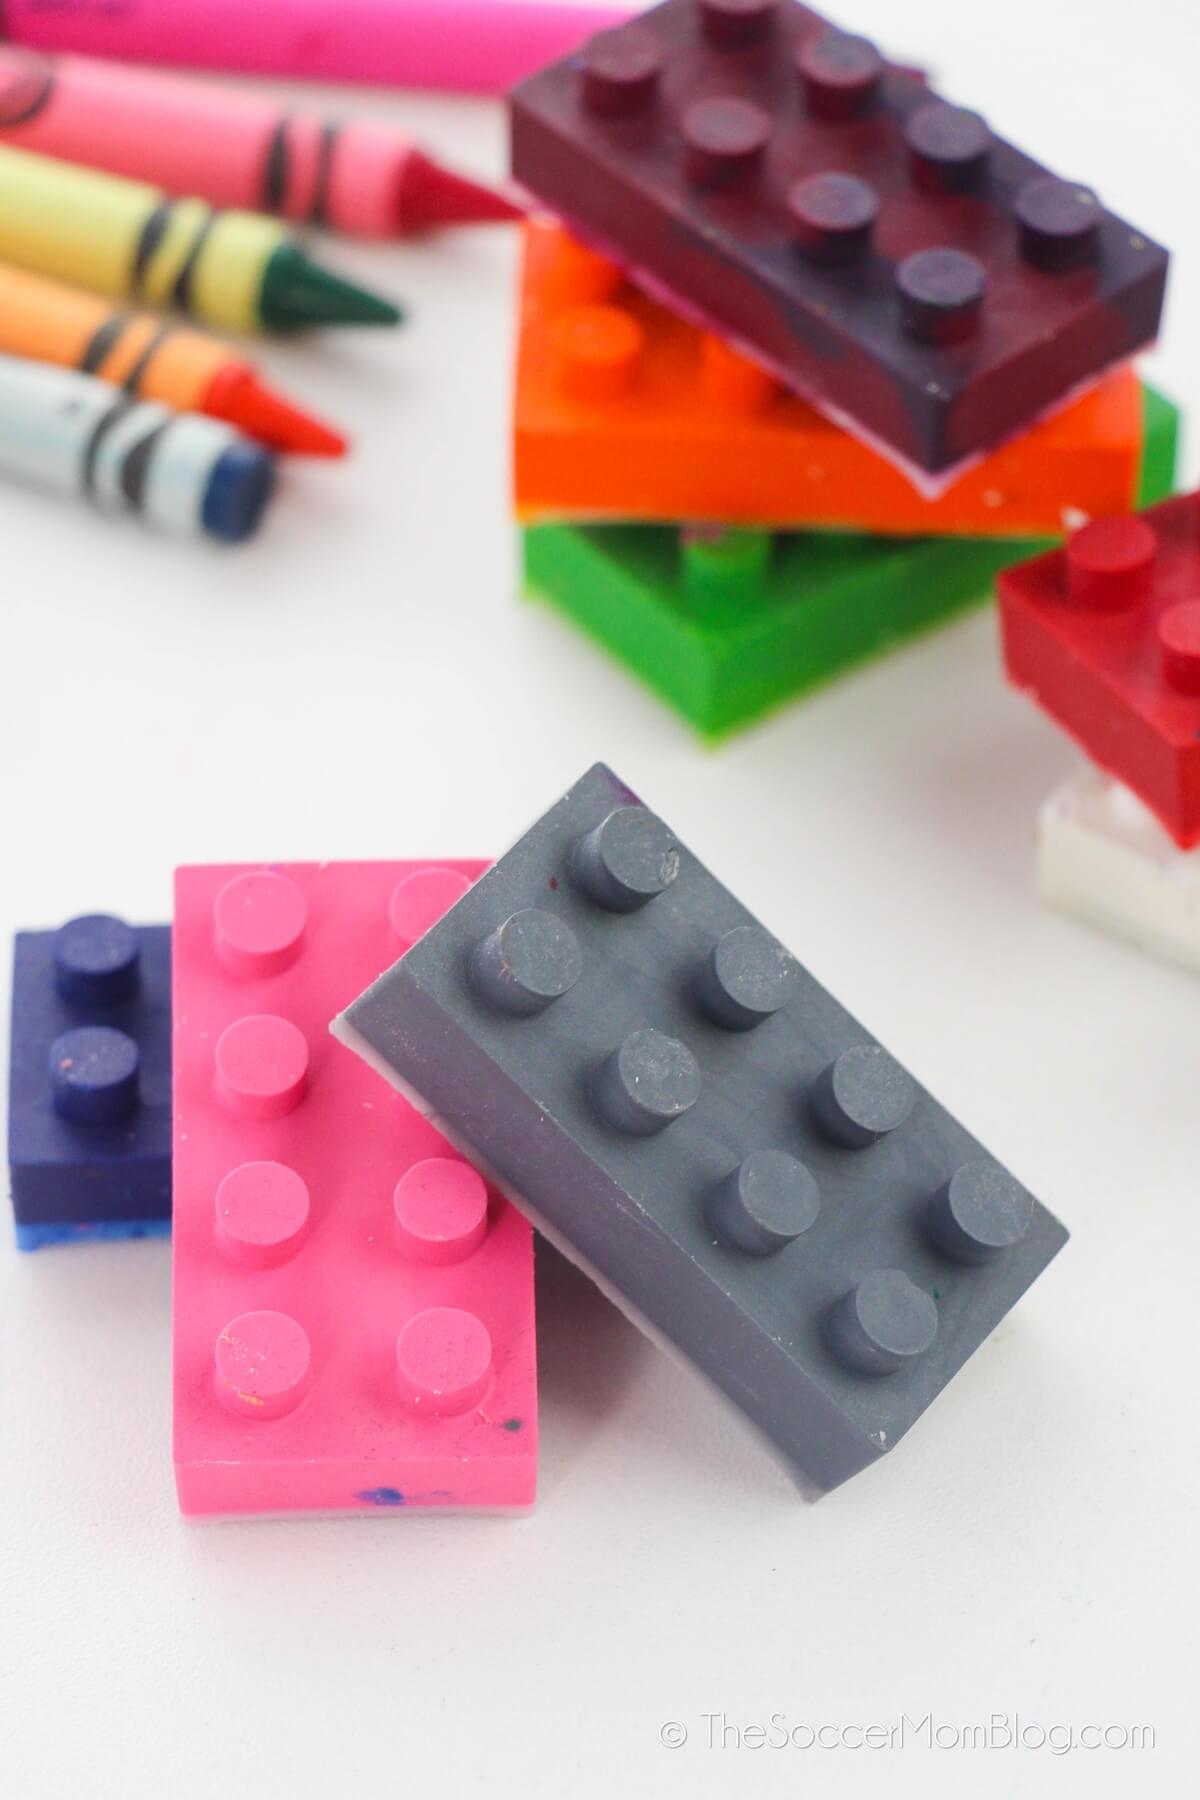 Finished Lego Block Crayons, with regular crayons 